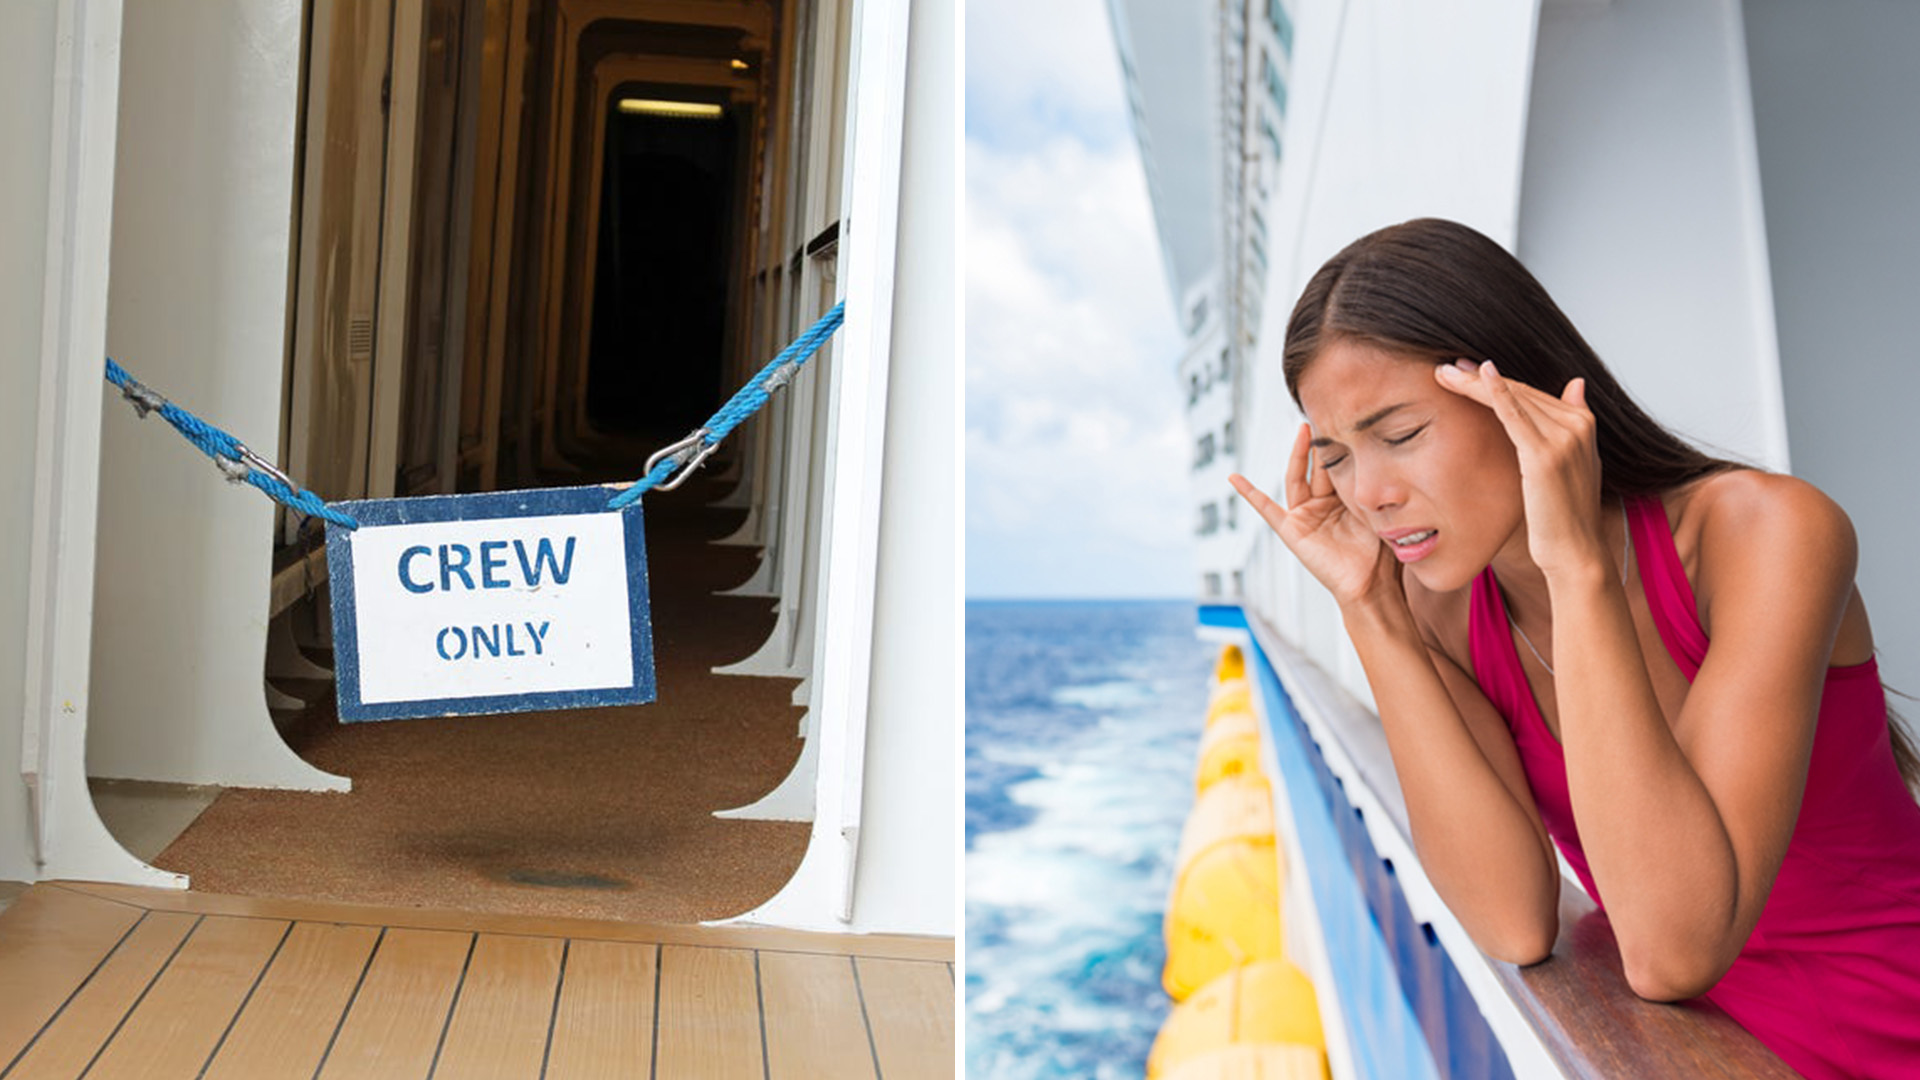 Cruise-ship etiquette reaches beyond proper attire and not fraternizing with the staff, and many of these points are things you wouldn't necessarily consider to be improper. So whether you consider yourself a seasoned sea traveler or this is your first experience on a cruise, being privy to these obscure guidelines and things you should NEVER do while cruising the seas will make your vacation experiences the dream you always envisioned it would be.